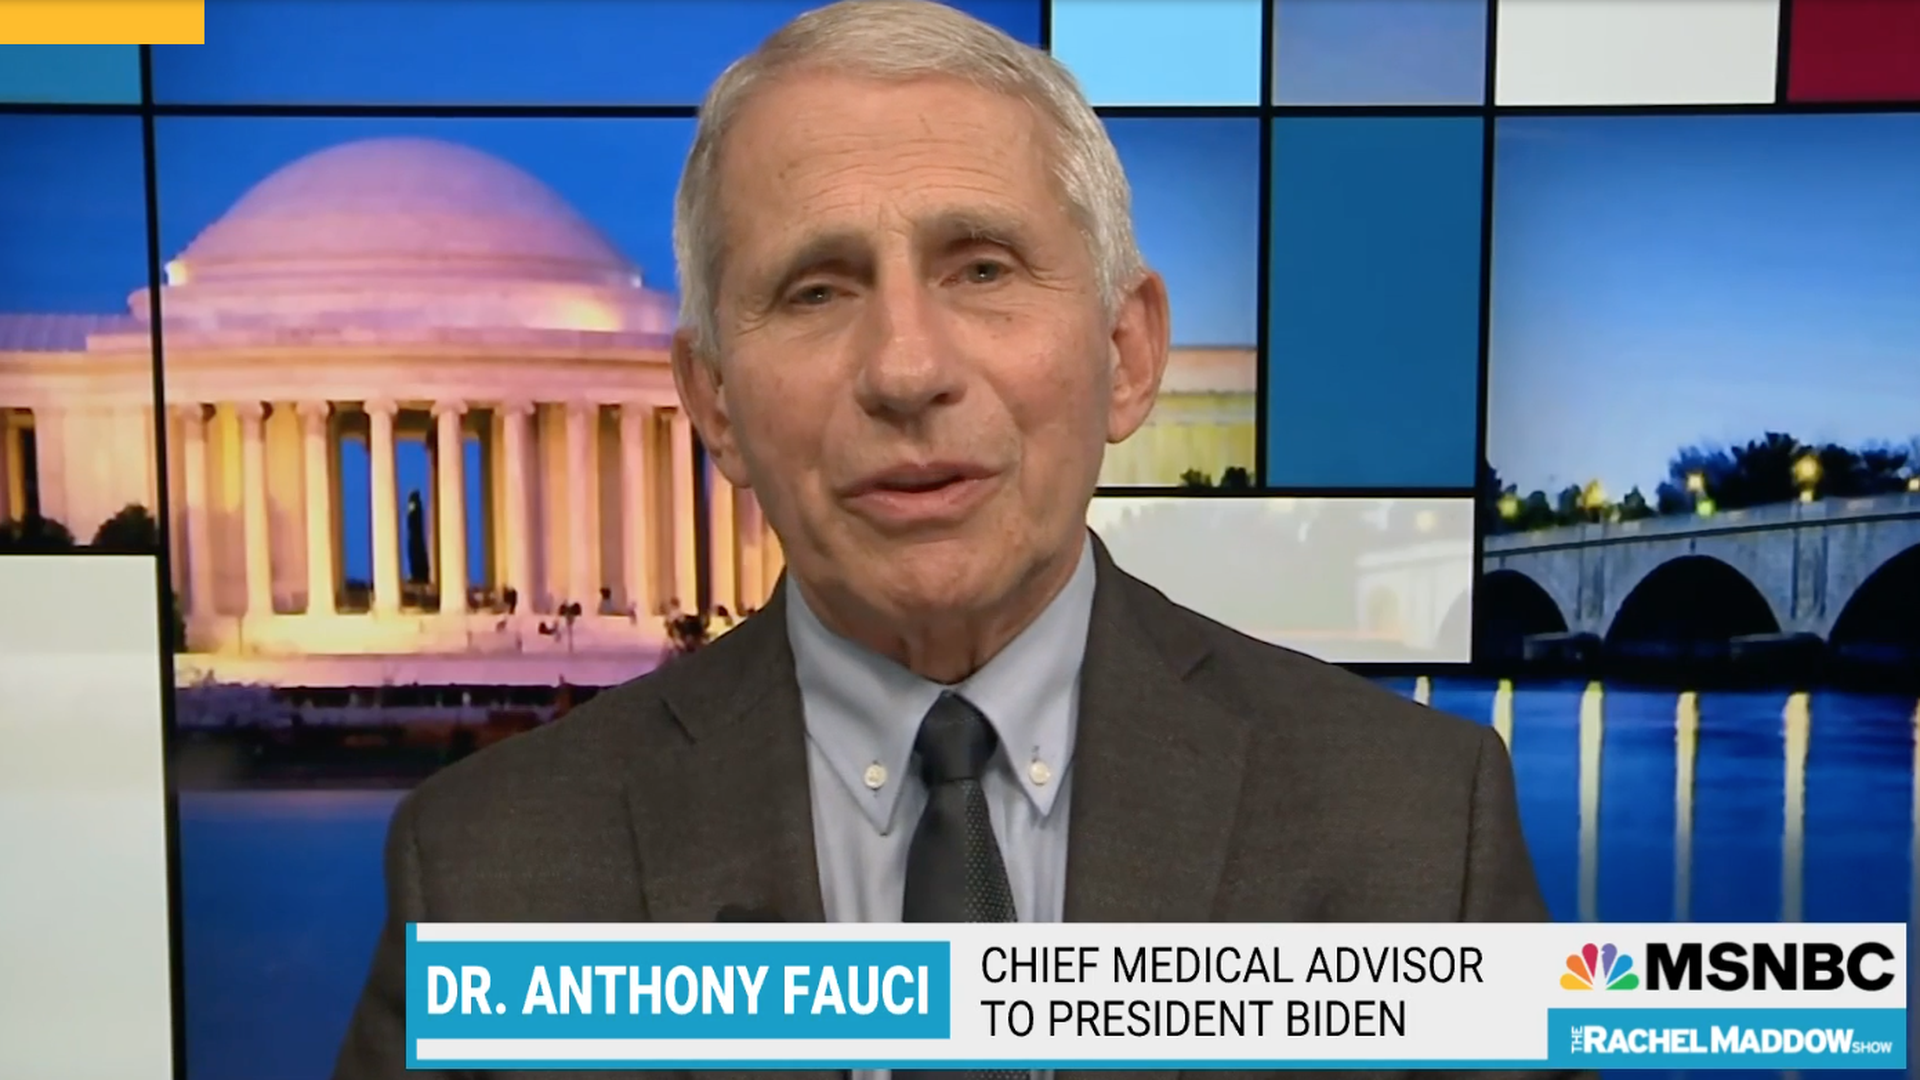 A screenshot of NIAID Director Anthony Fauci on "Rachel Maddow" on Monday night.